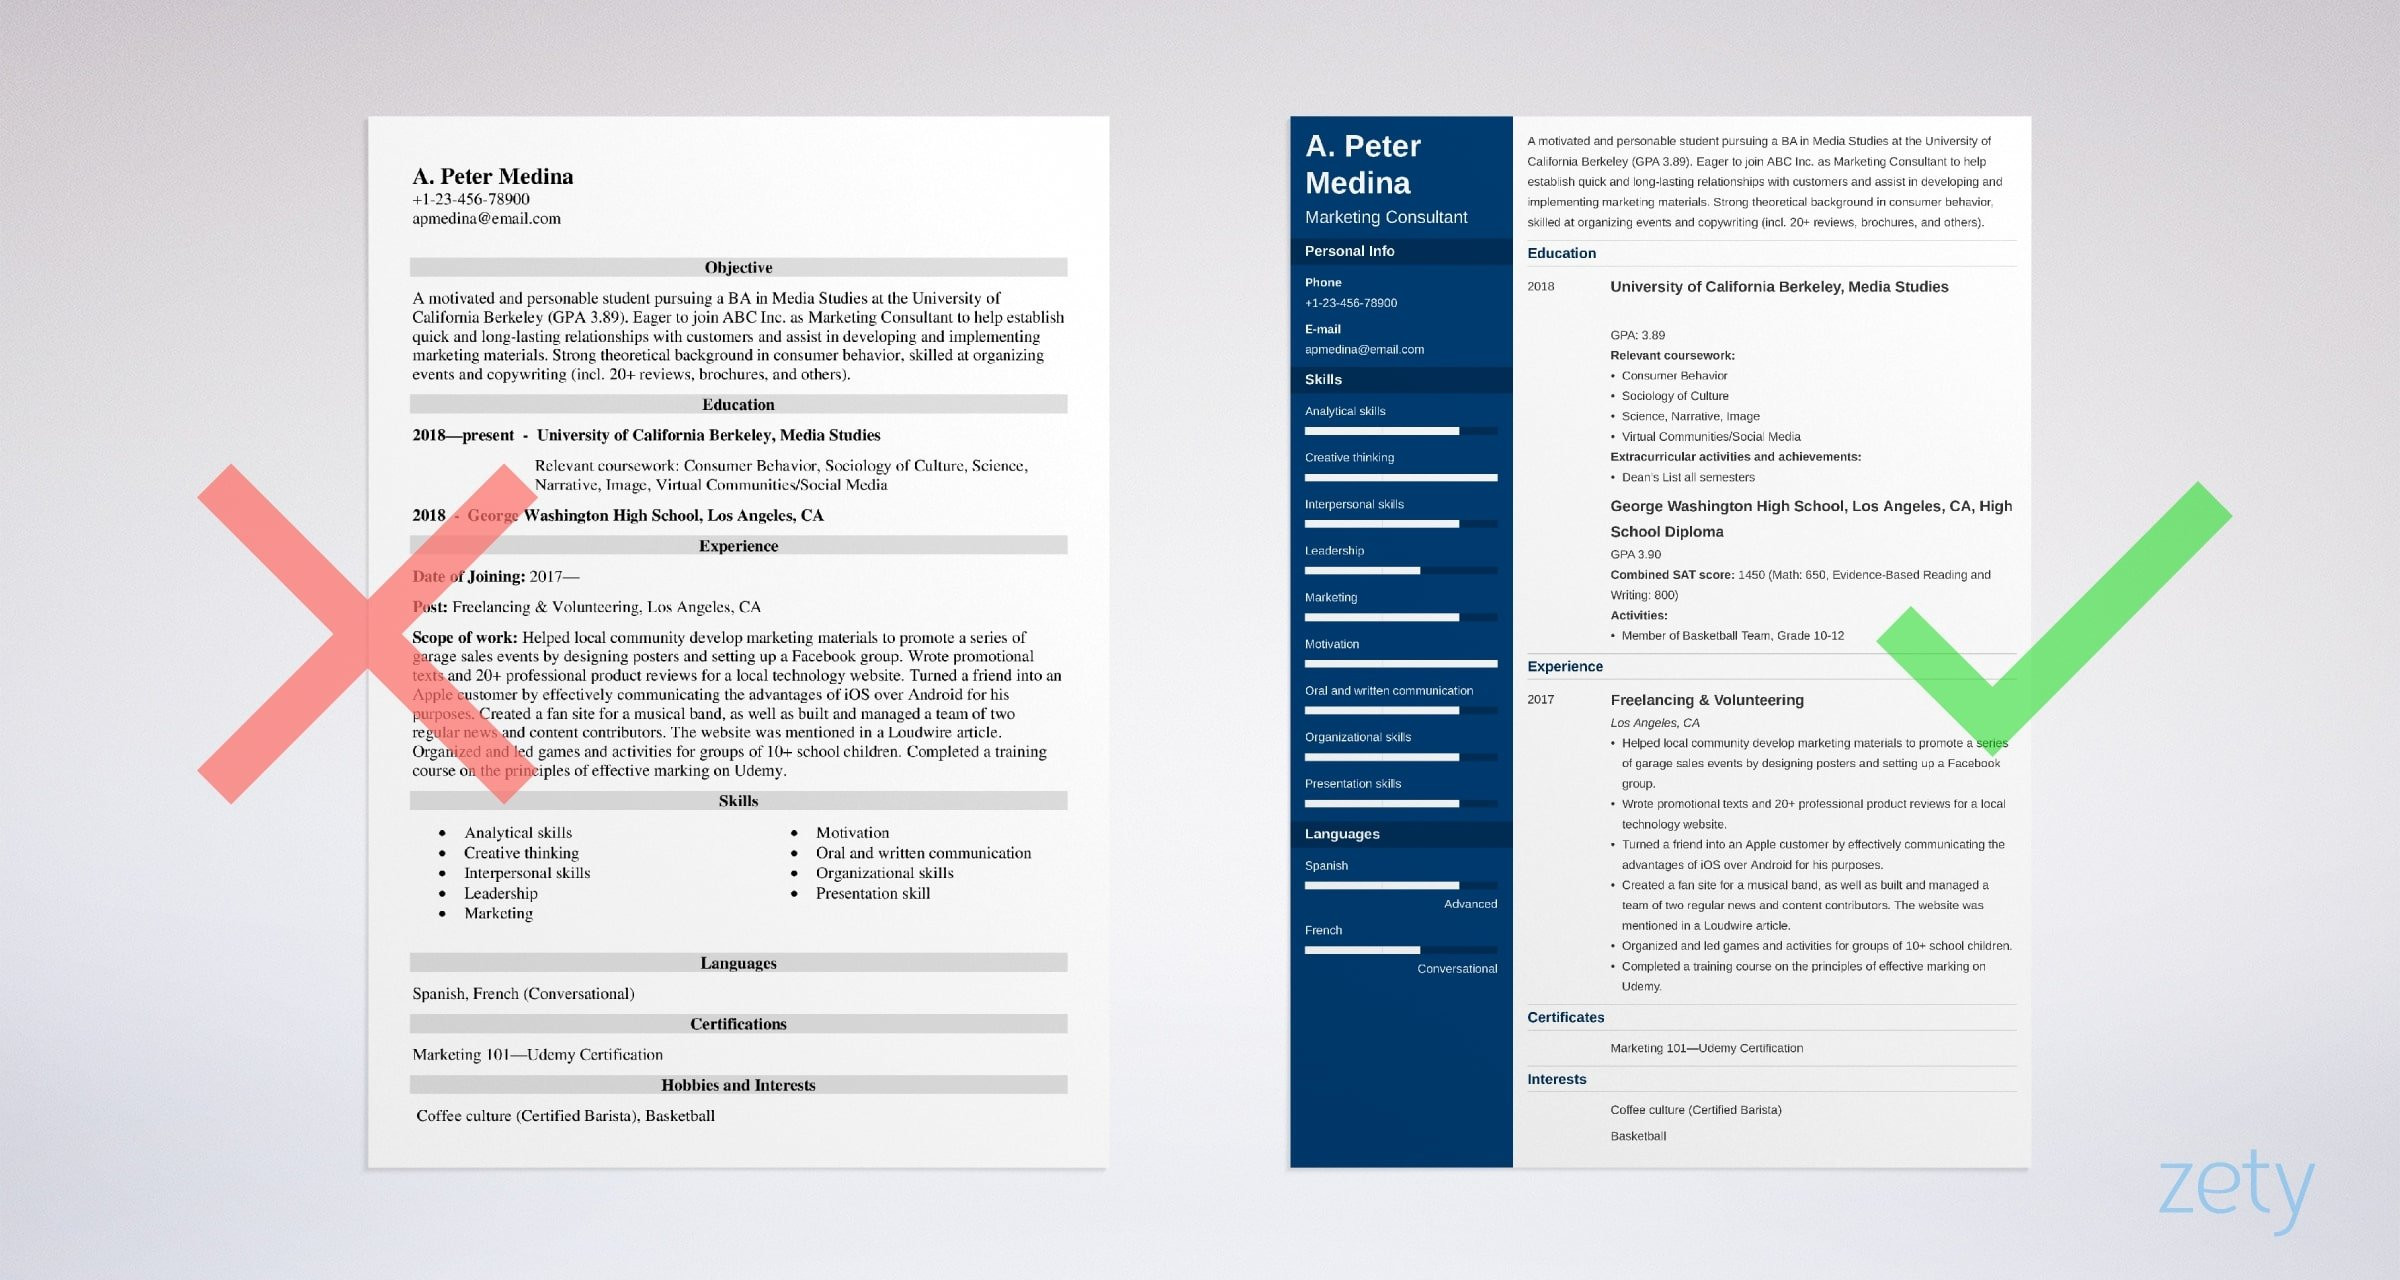 Basic Resume Template No Work Experience How to Write A Resume with No Experience & Get the First Job